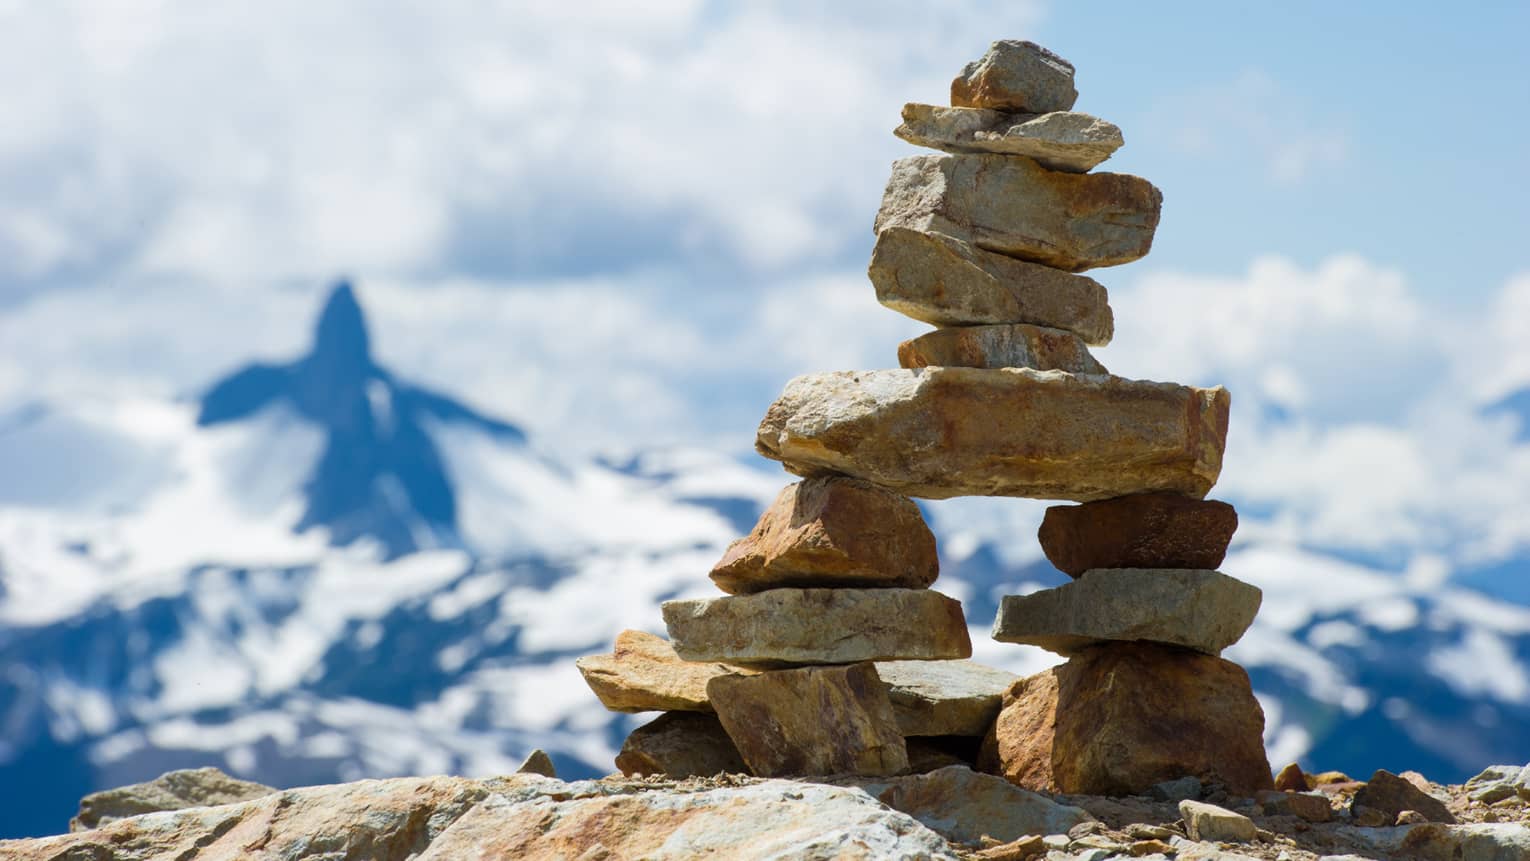 Close-up of an inukshuk atop a high rock shelf, against blue sky, white clouds and a majestic distant mountain.